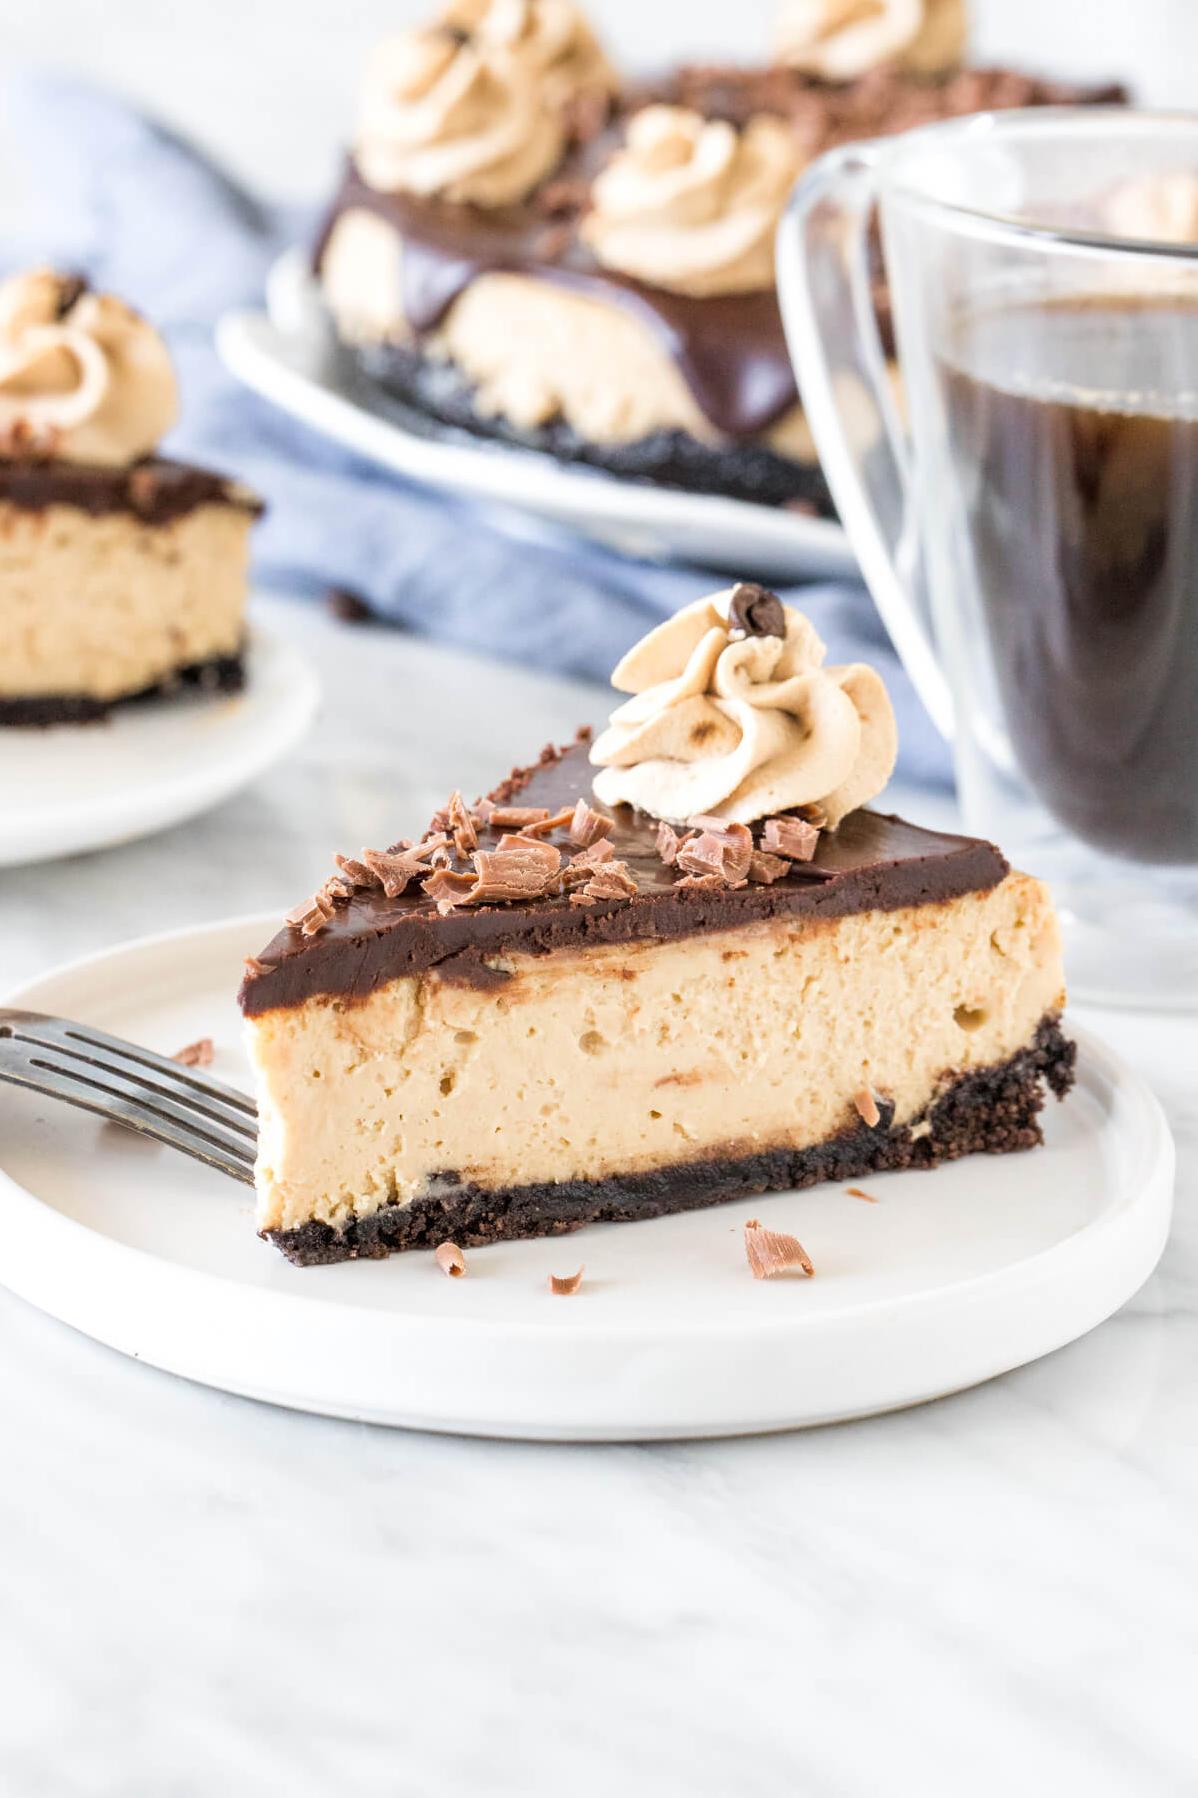  Creamy cheesecake with a hint of coffee flavor